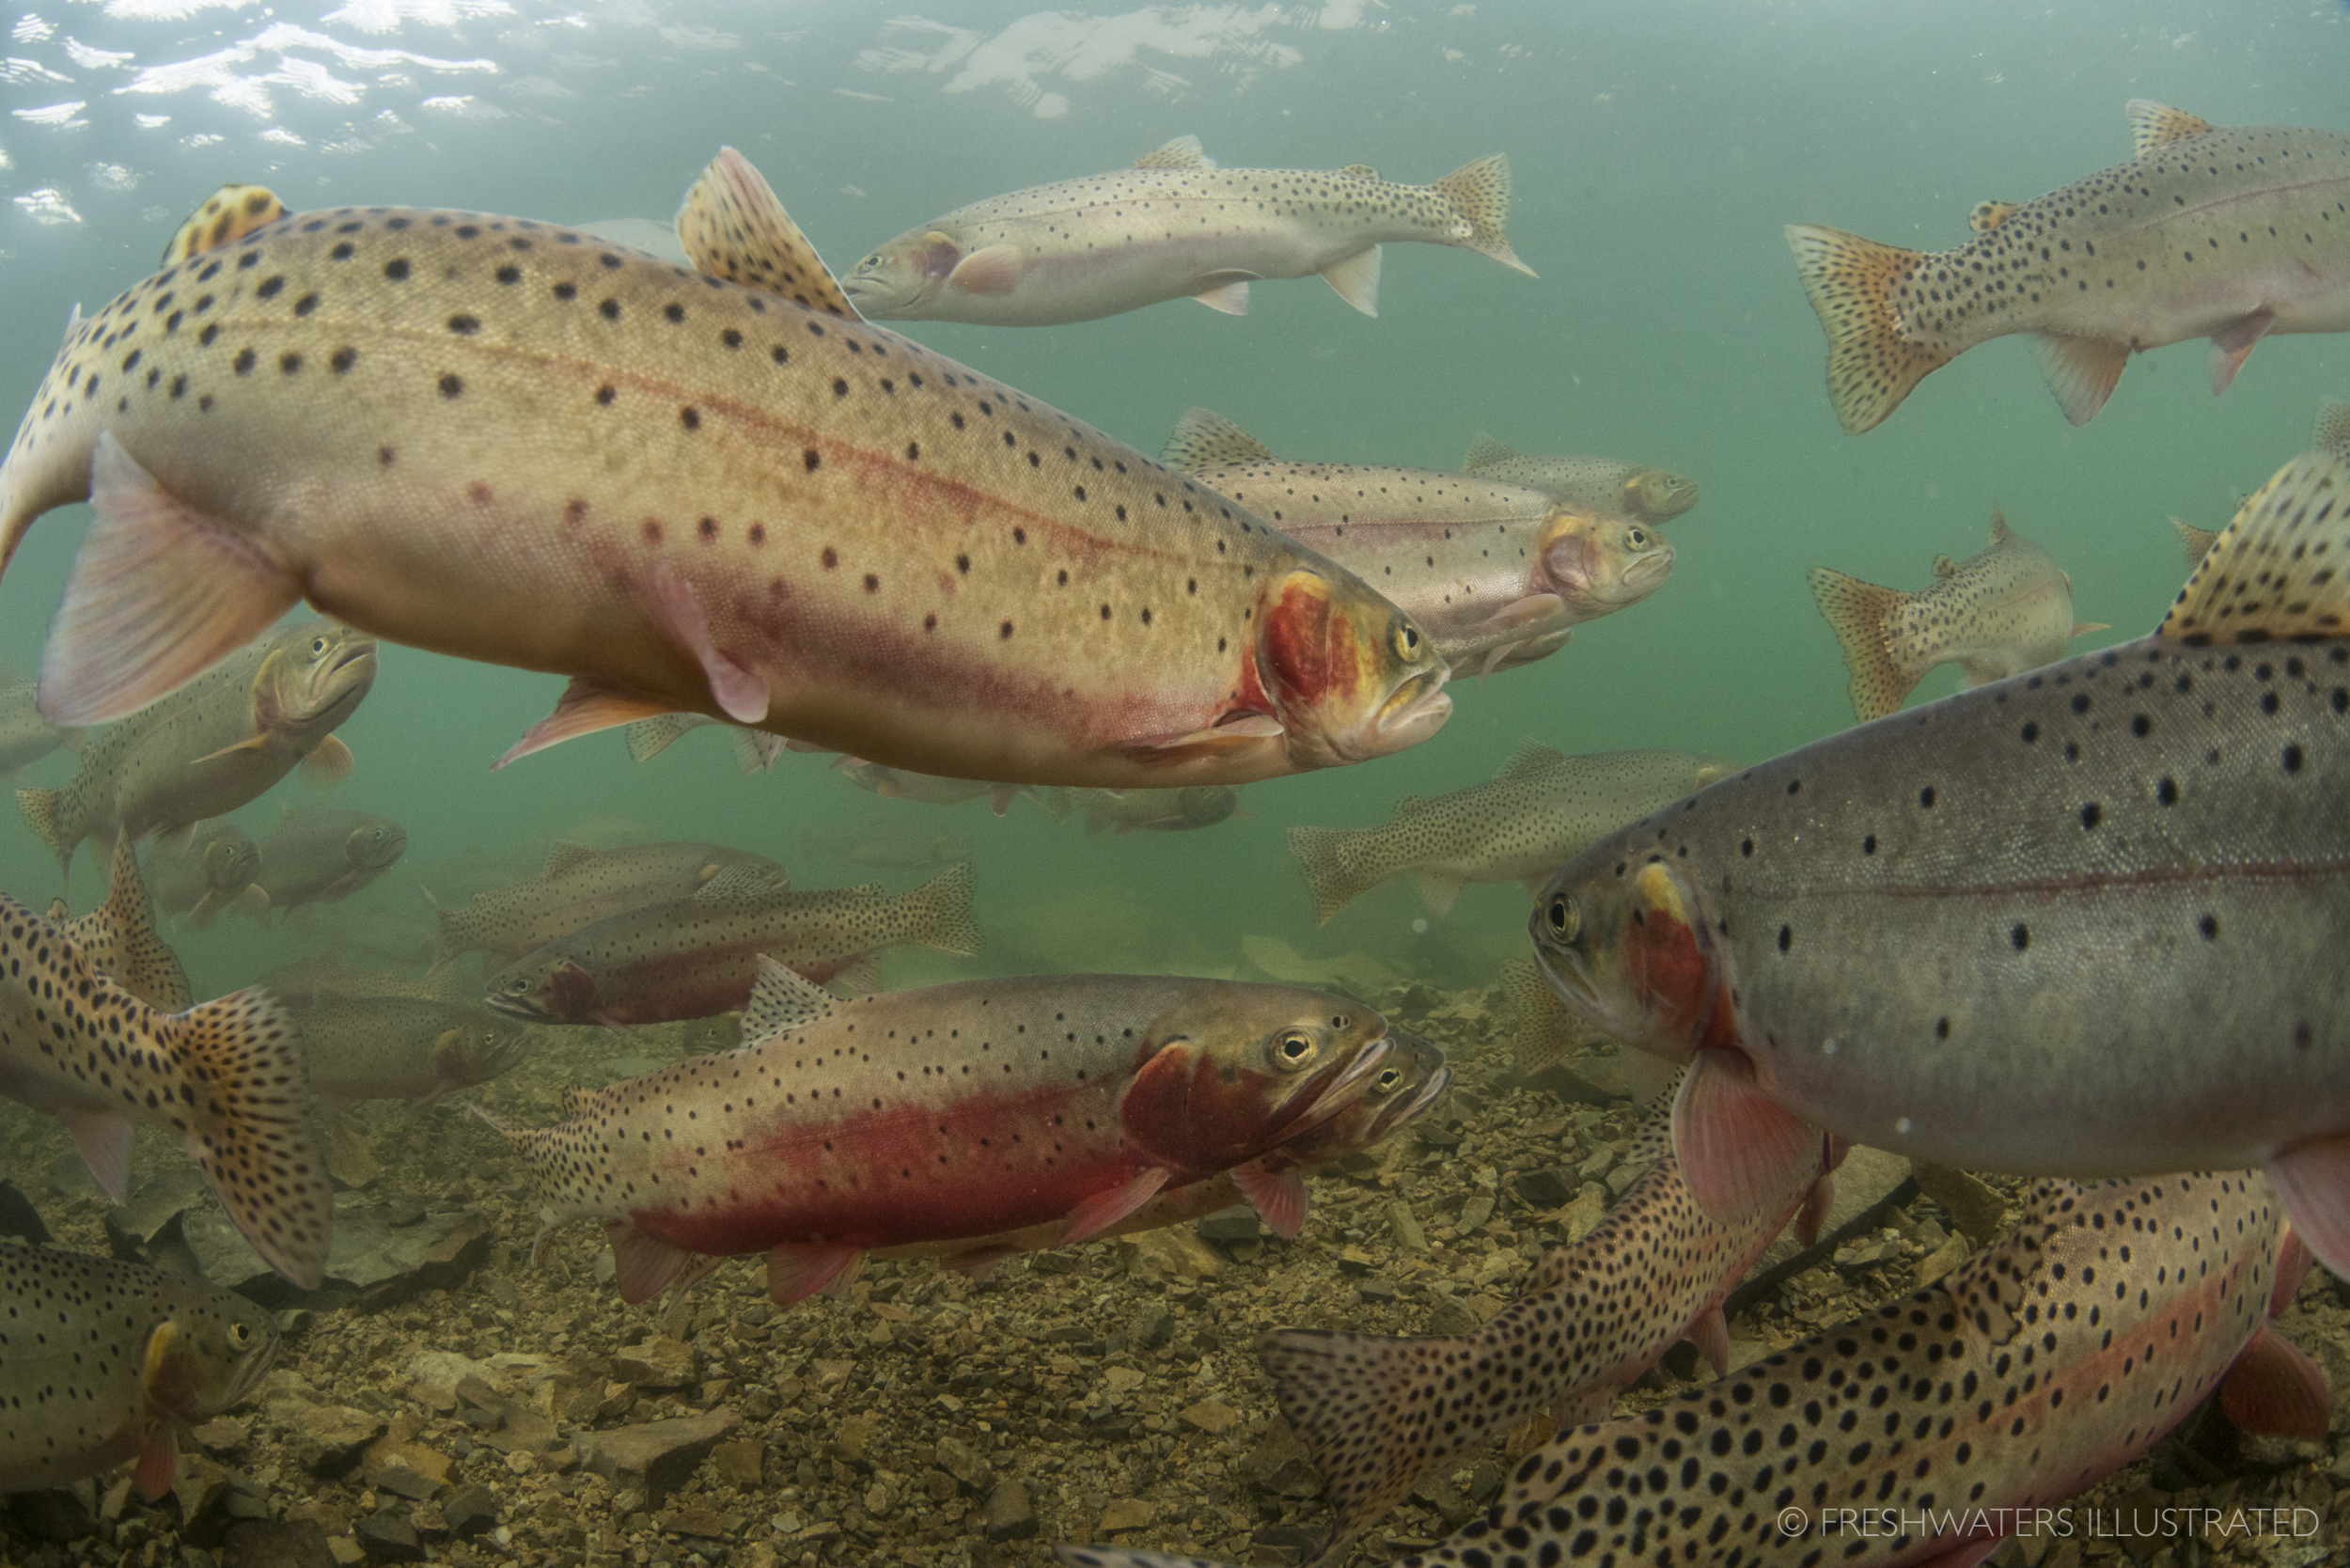  Swimming the line between chaos and grace a large aggregation of Colorado River Cutthroat trout arrive at their spawning grounds in an alpine lake of Colorado's high country. One of three remaining cutthroat subspecies found in Colorado, this native